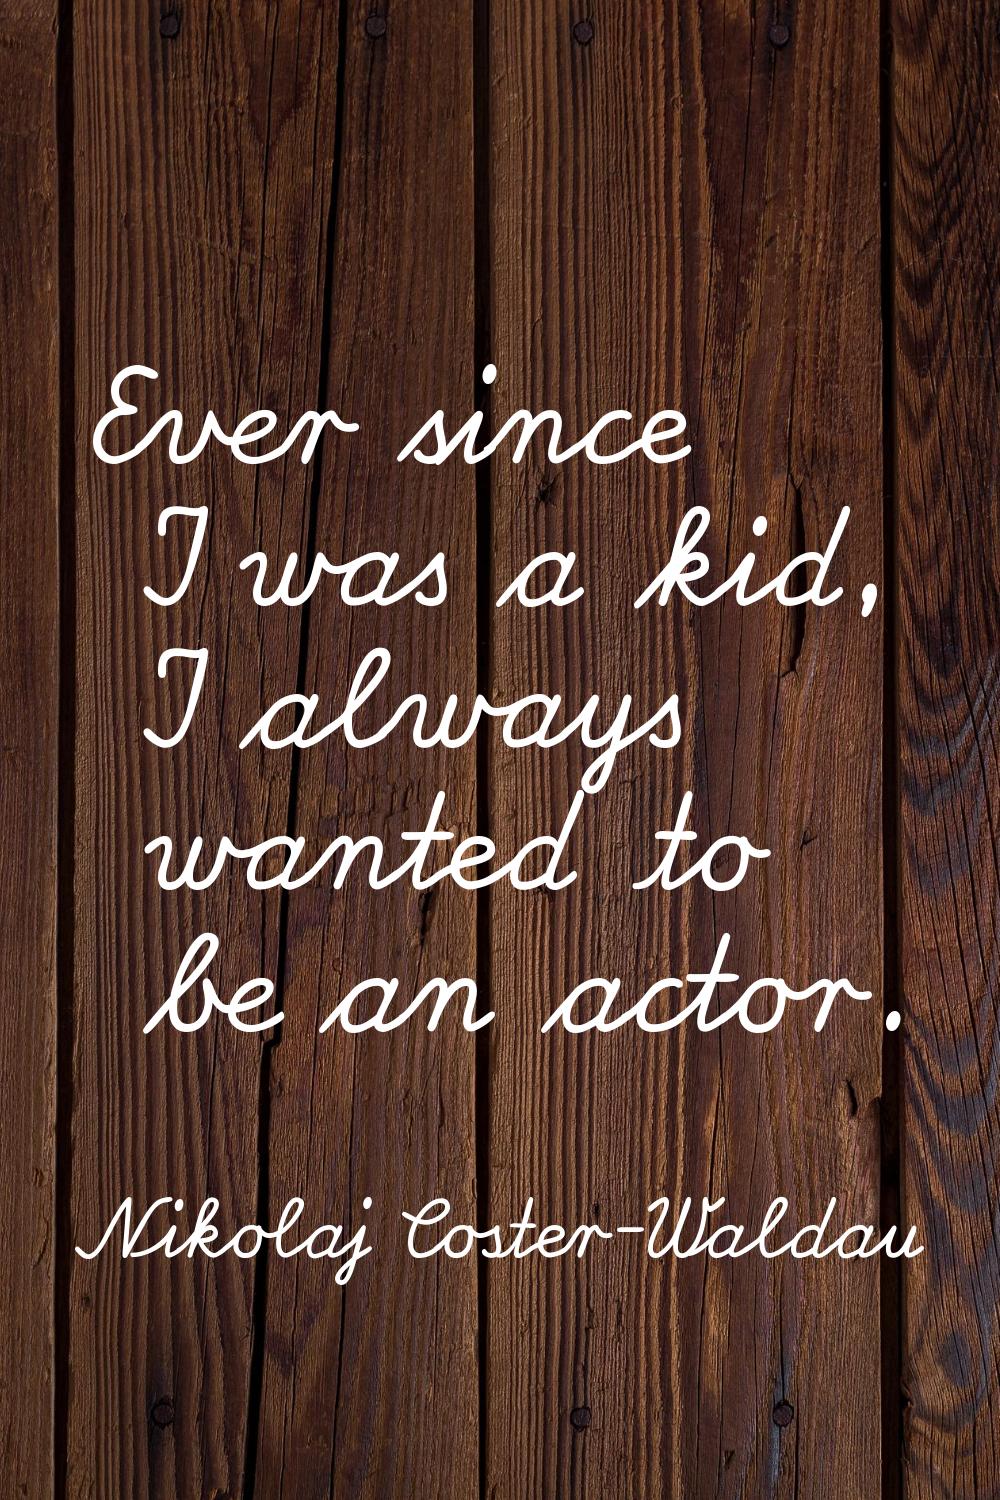 Ever since I was a kid, I always wanted to be an actor.